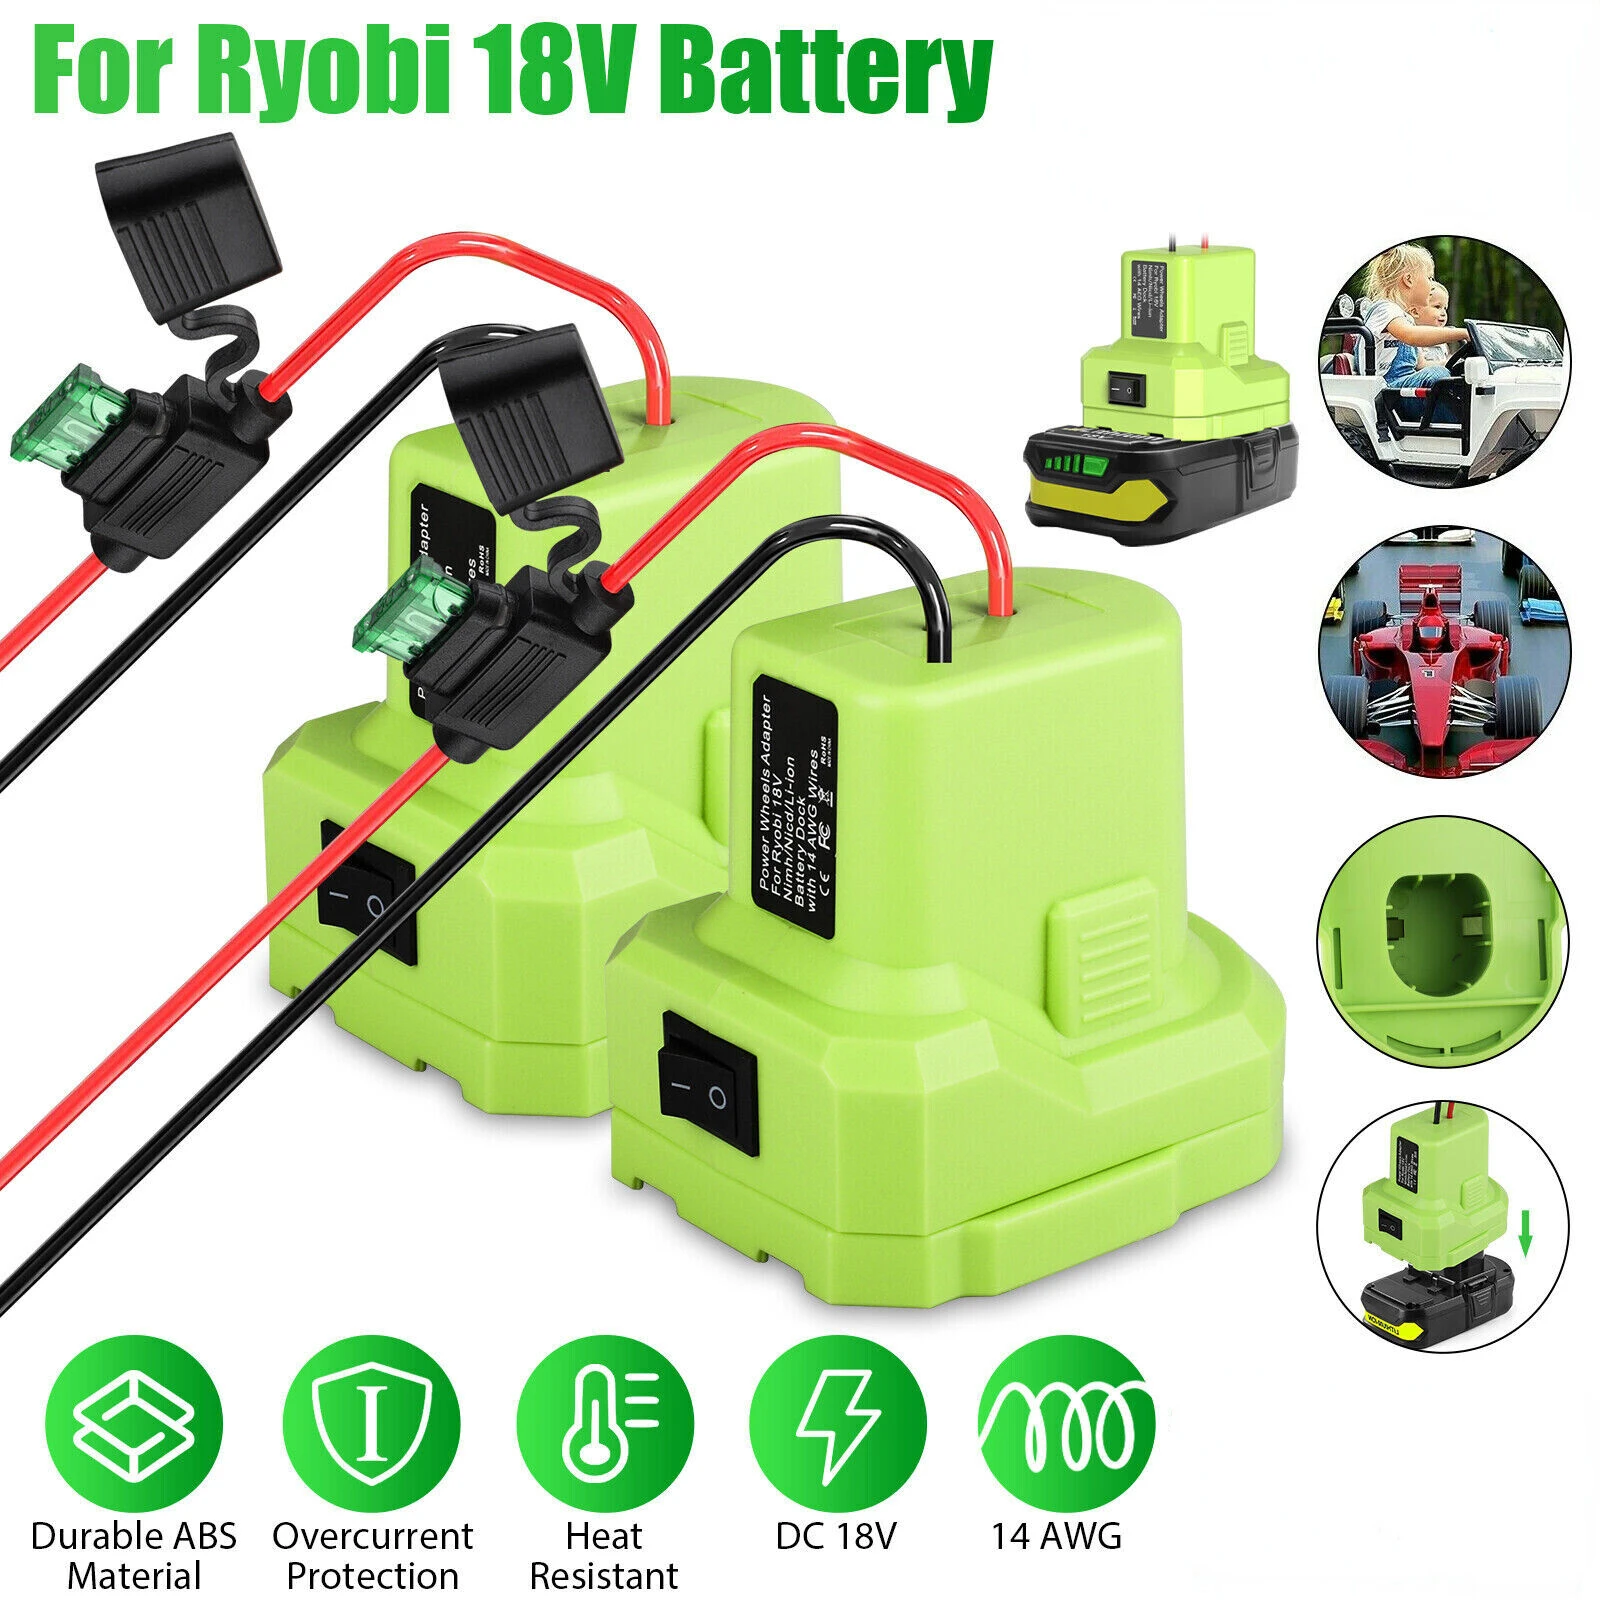 Enlarge Power Wheels Adaptor for Ryobi 7.2-20V Lithium Ni-MH Battery Dock Power Connector 14 AWG DIY Adapter Tools P108 P107 P102